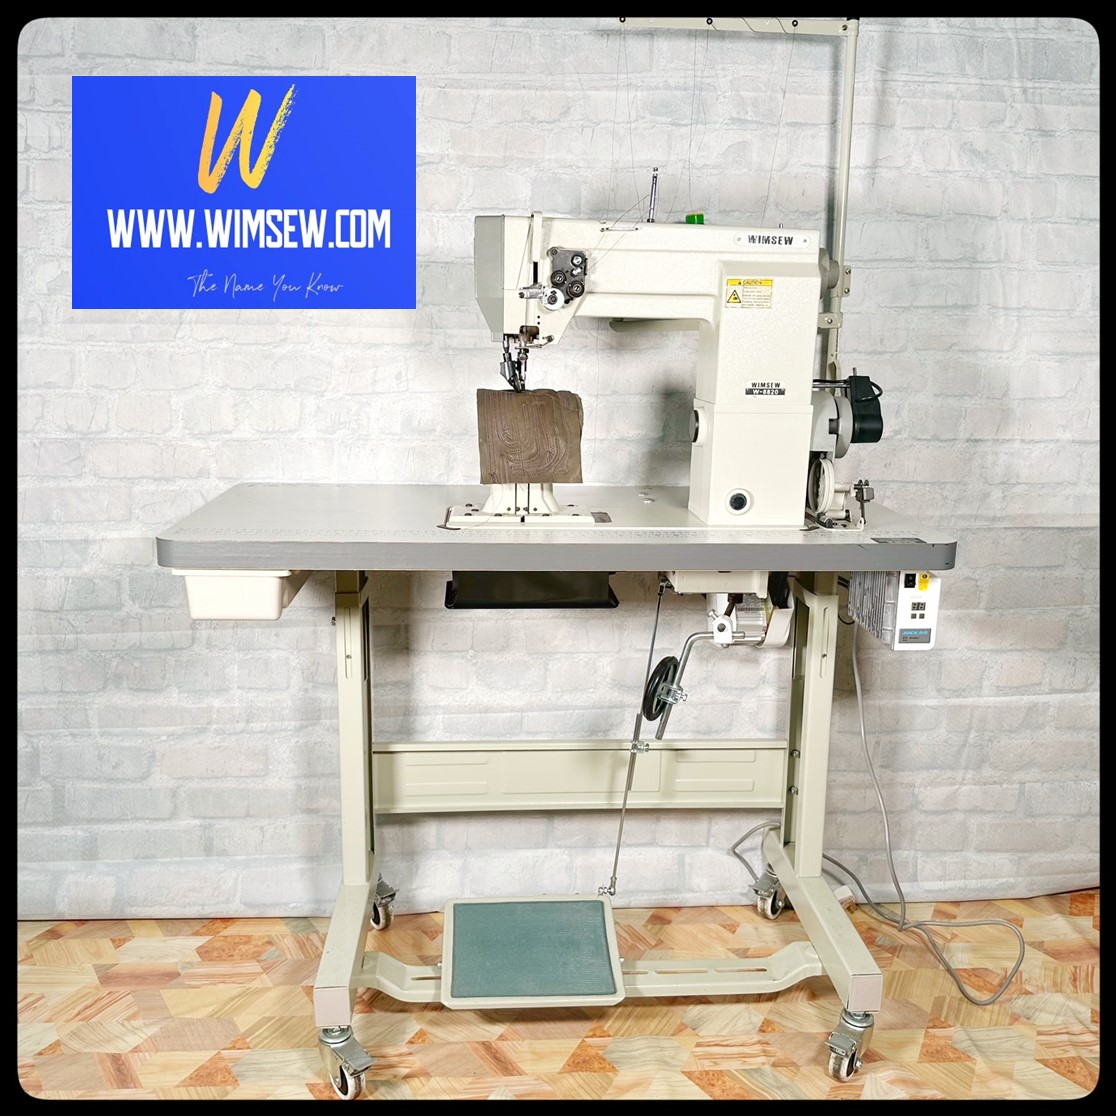 WIMSEW 8820 Post Machine - Call now for more information. 020 8767 0036 - choose option 3